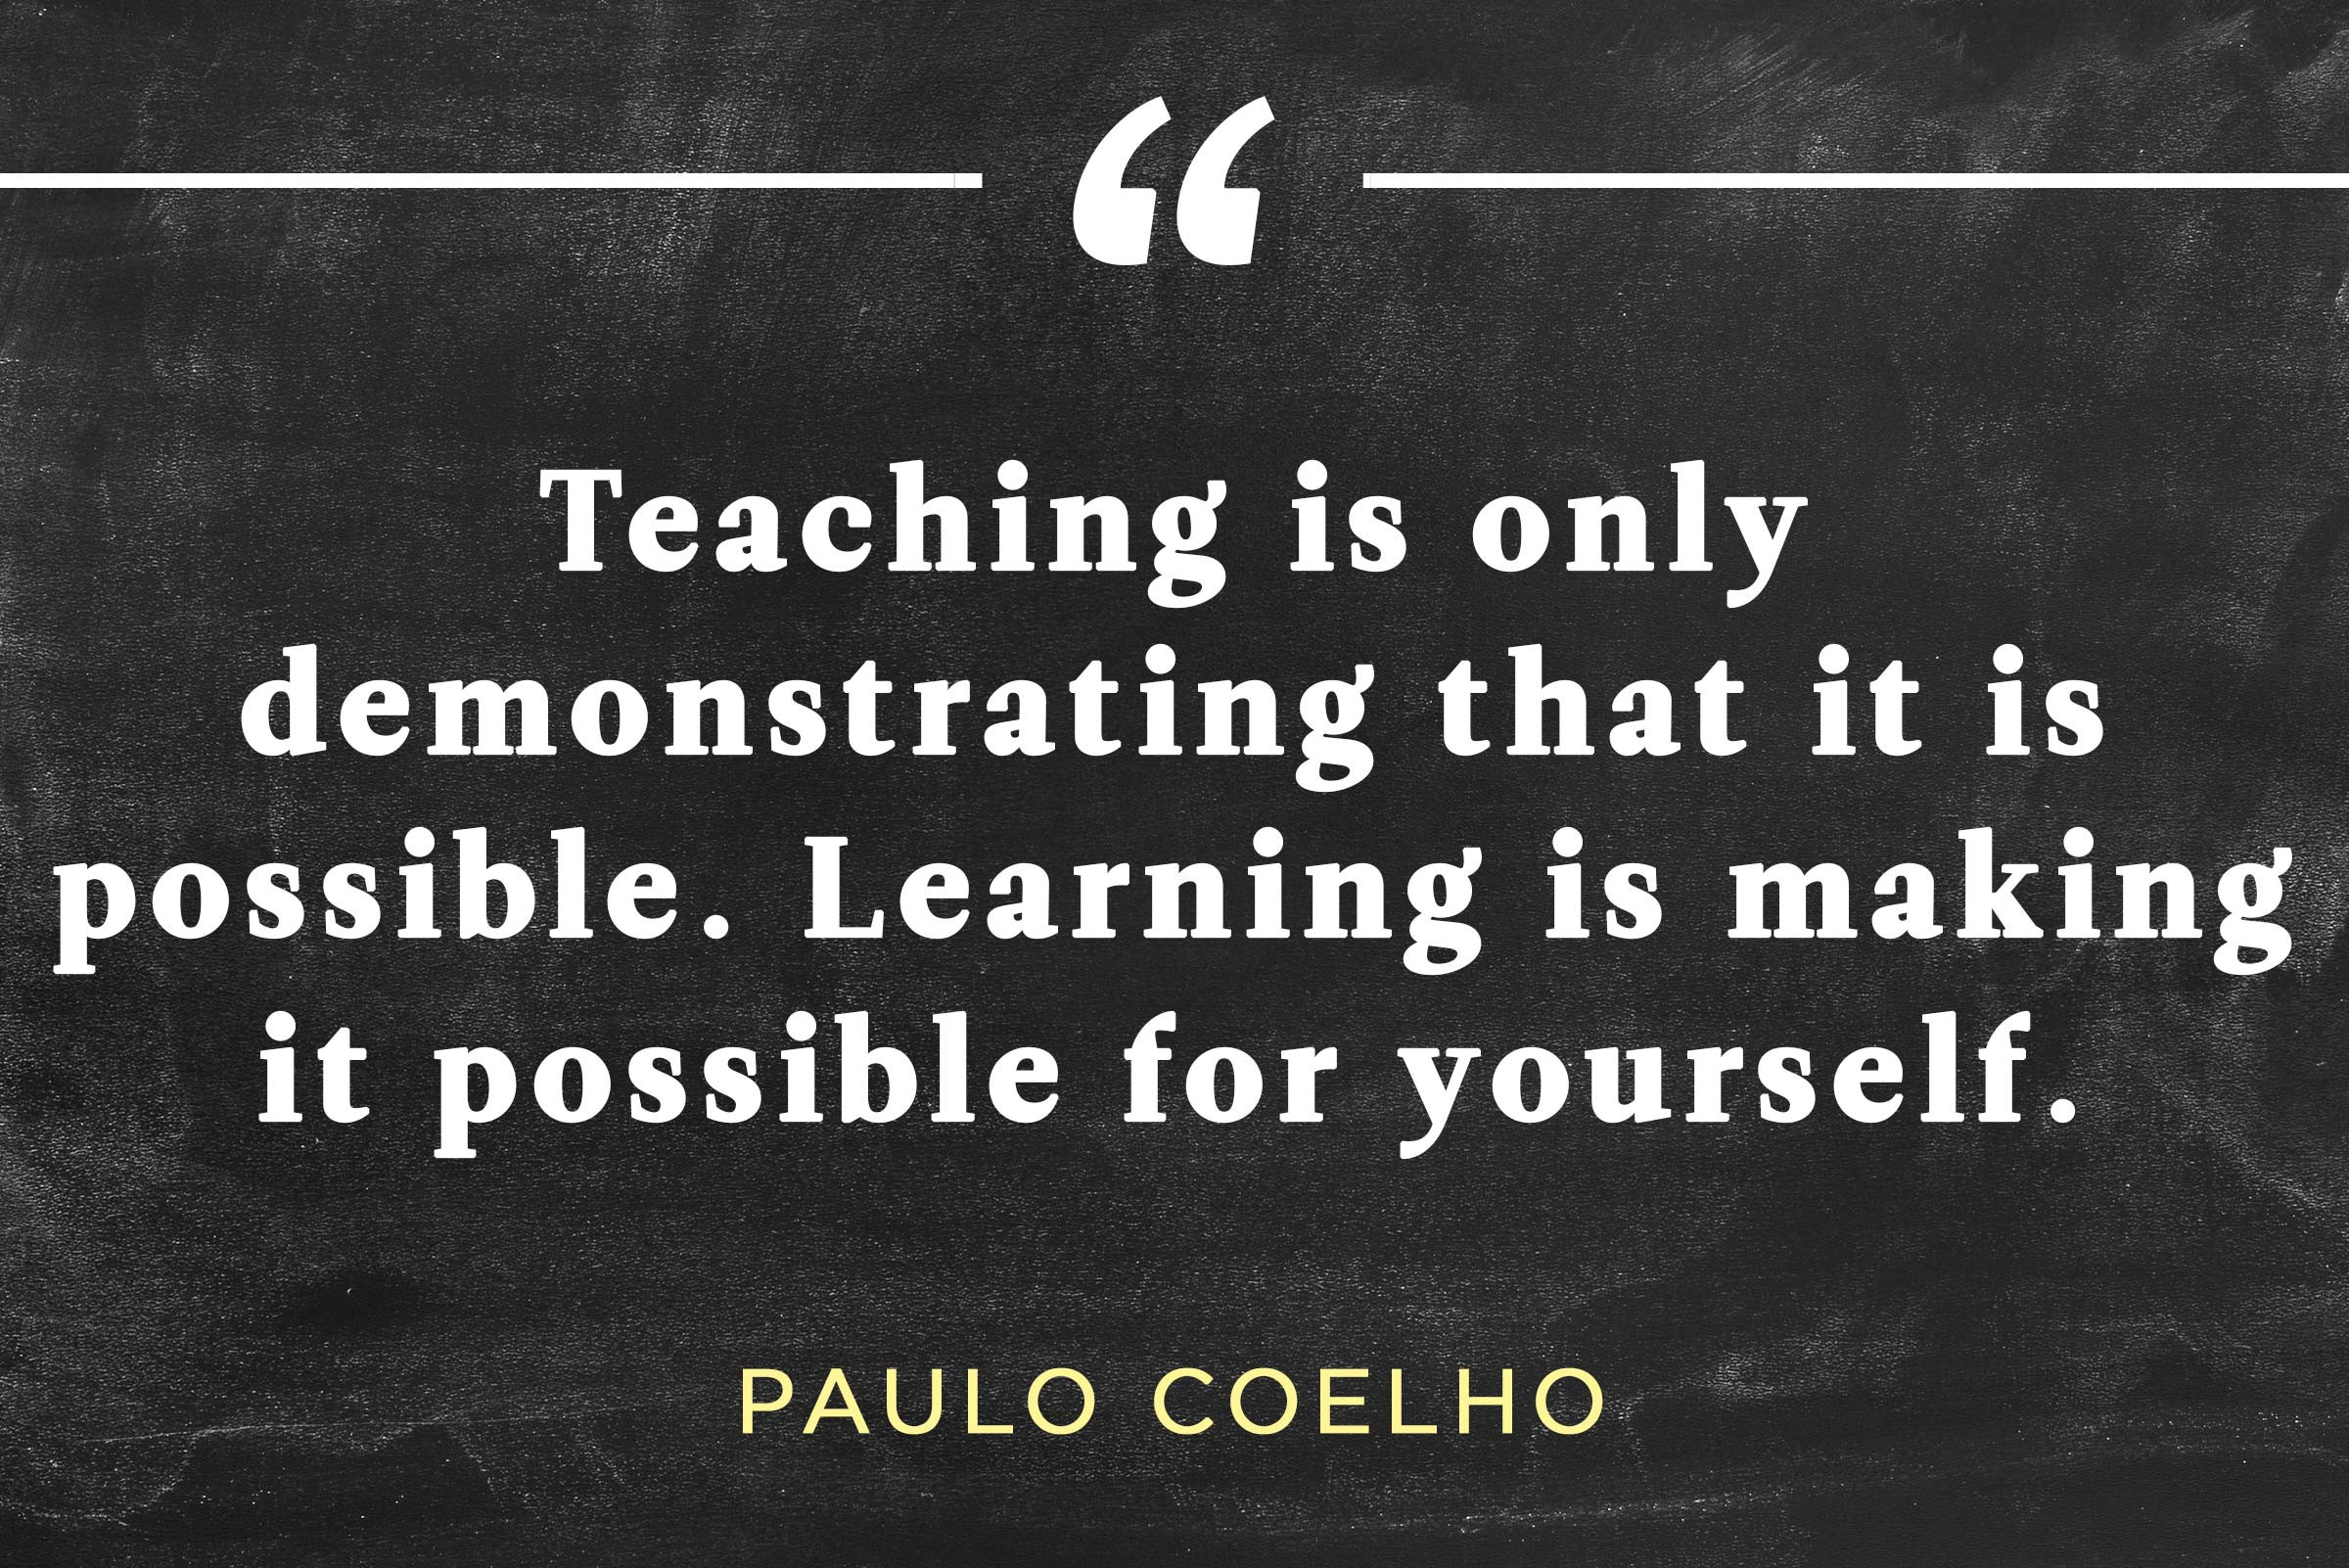 Inspirational Education Quotes For Teachers
 Inspirational Teacher Quotes